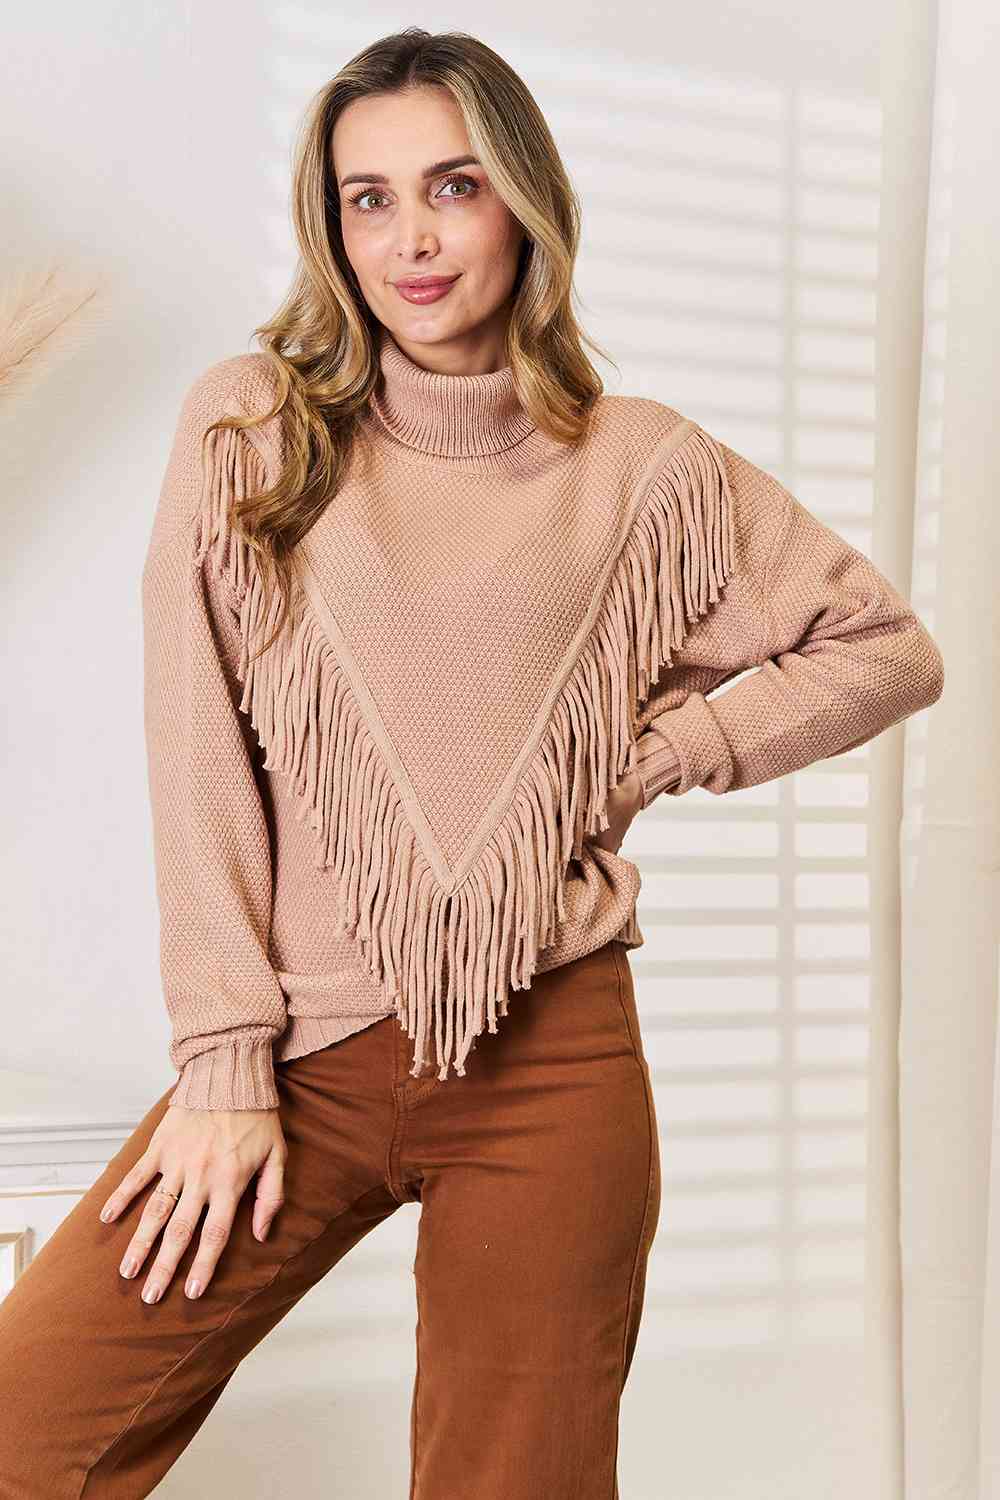 Give me the Fringe Front Long Sleeve Sweater